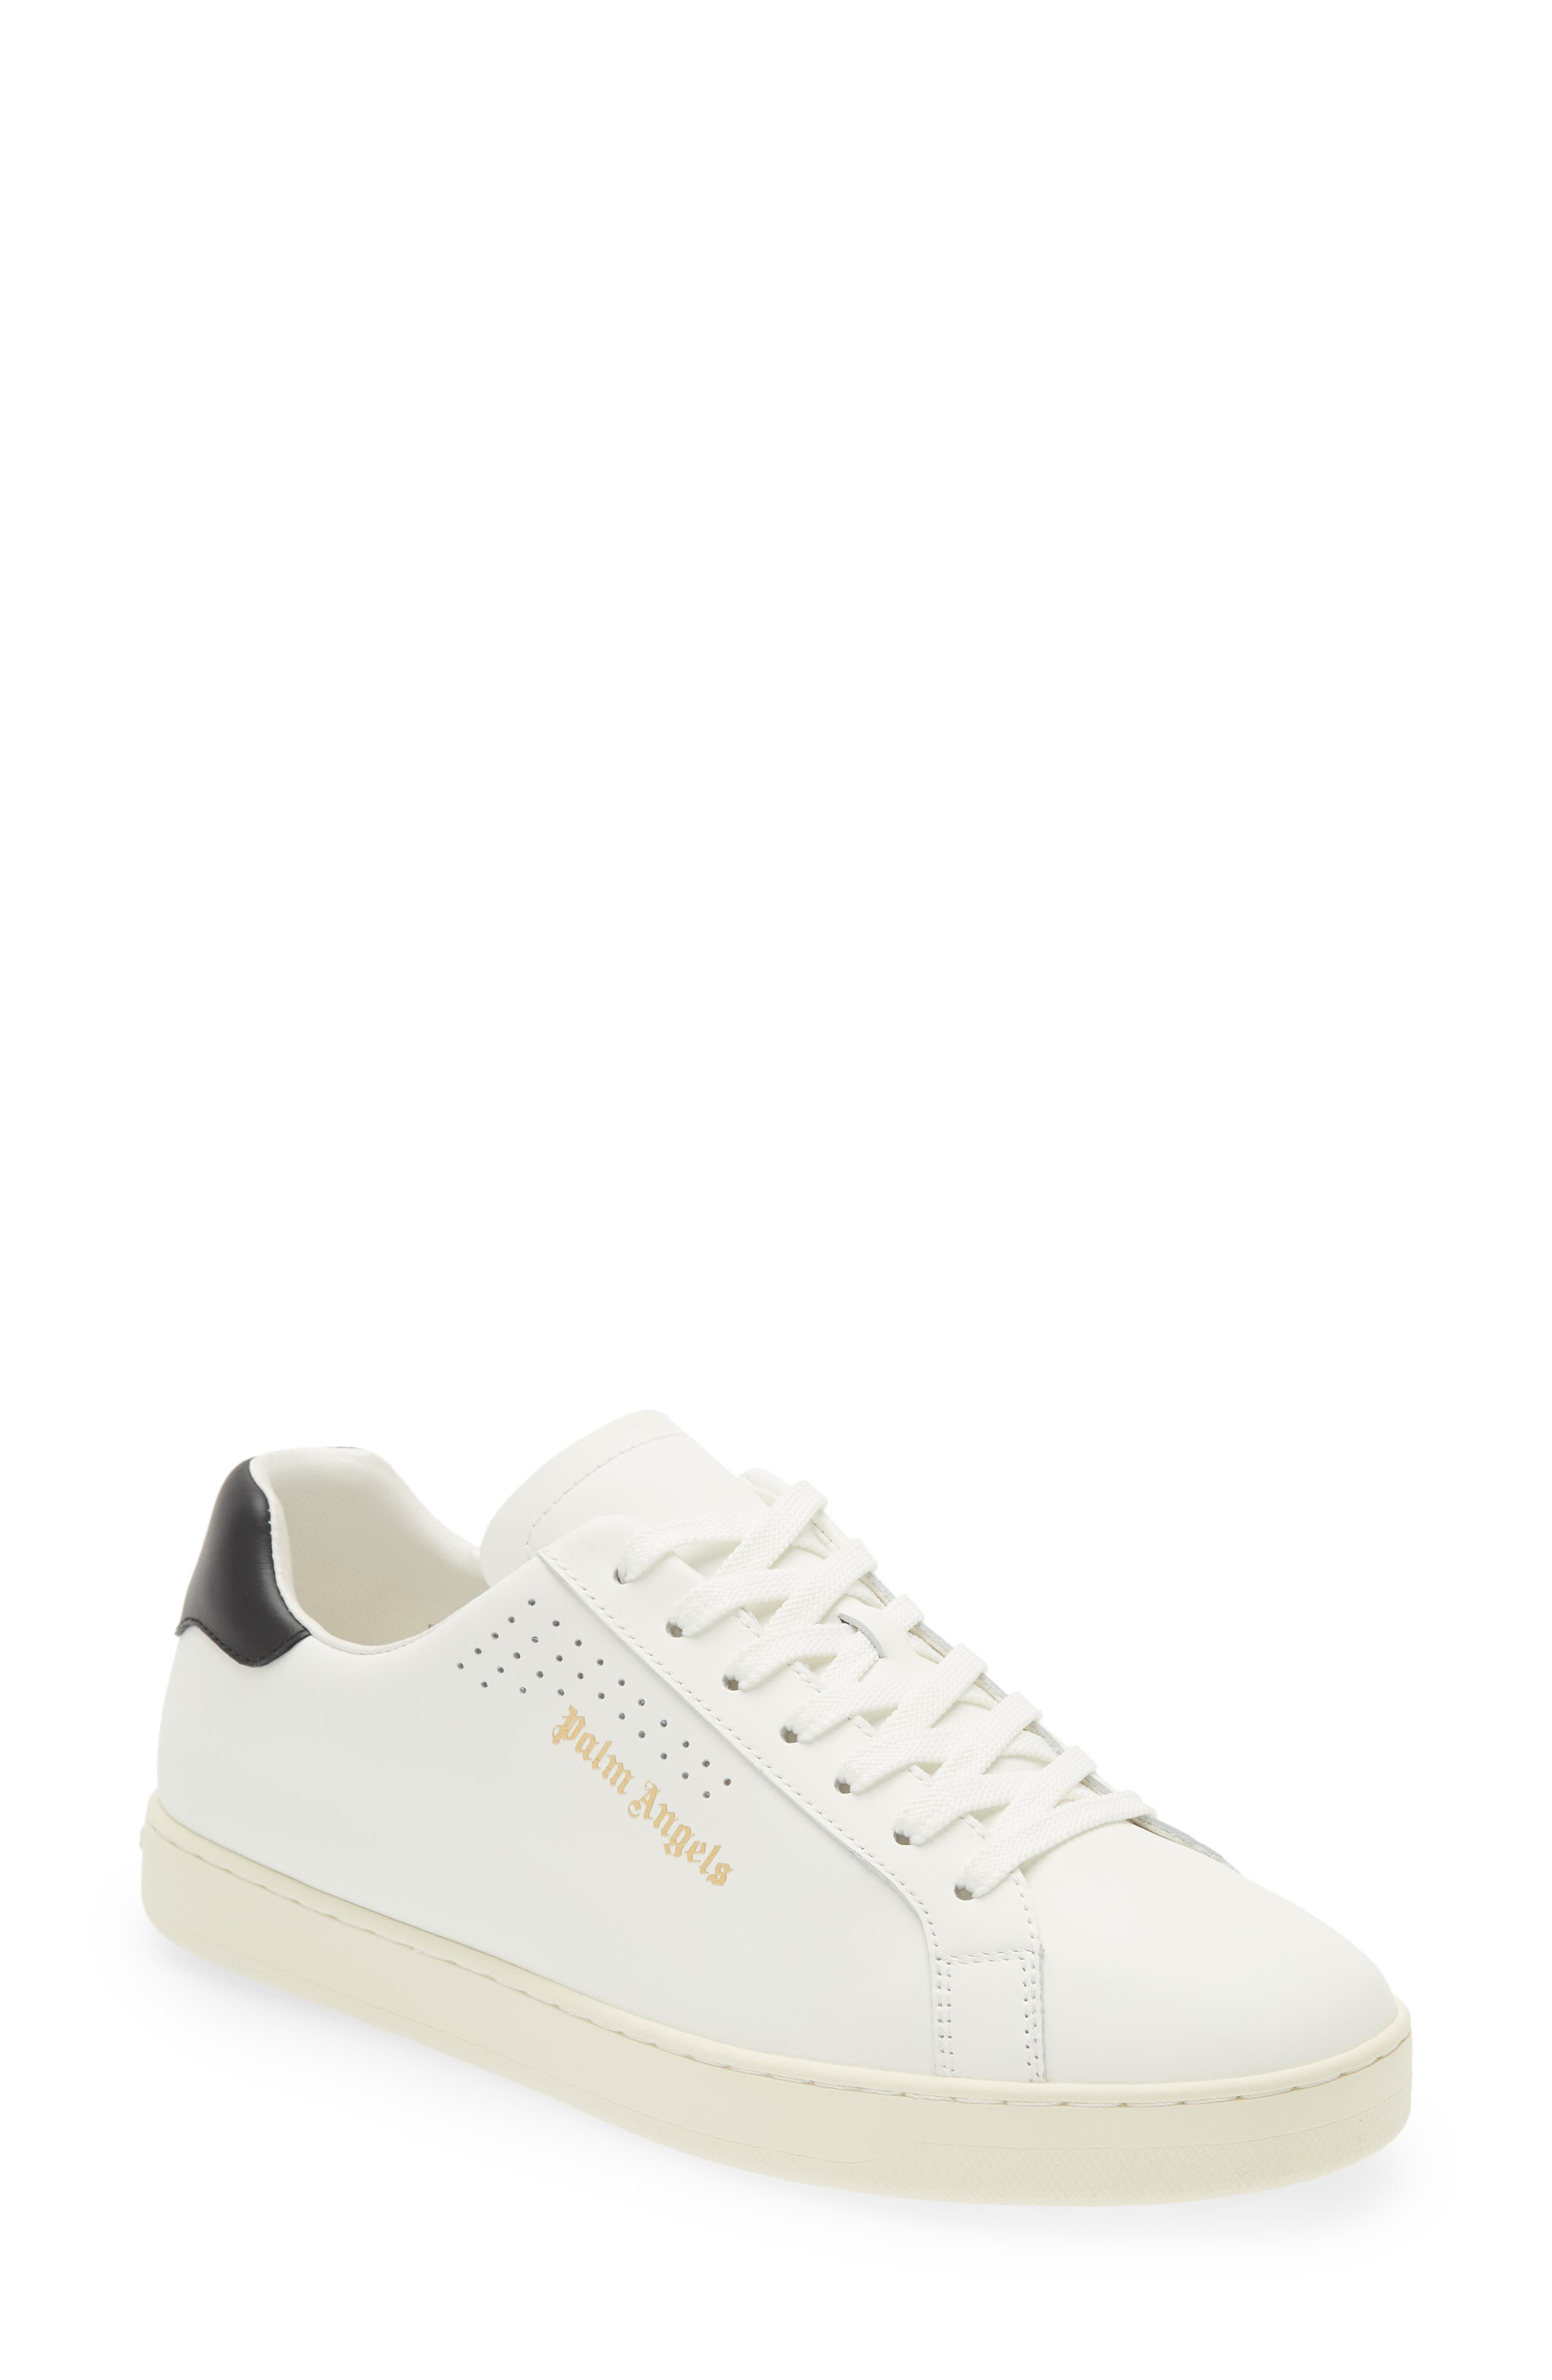 Palm Angels Palm 1 Low Top Sneaker in White/Black